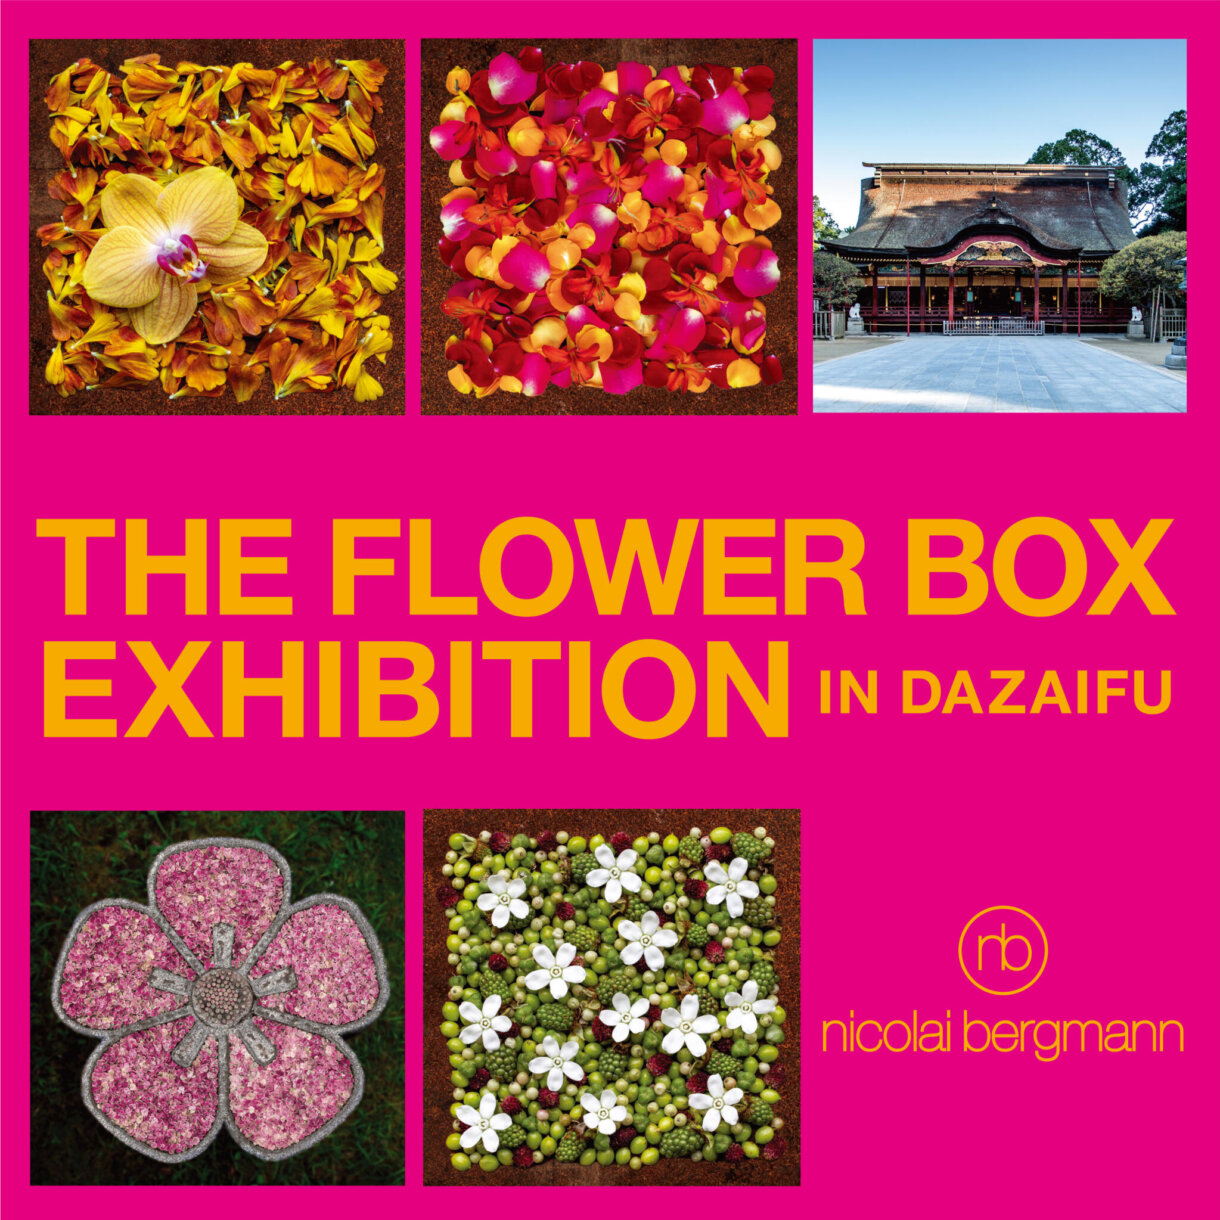 FUKUOKA:  THE FLOWER BOX EXHIBITION IN DAZAIFU – The world of Floral Art that emerged from the Flower Box